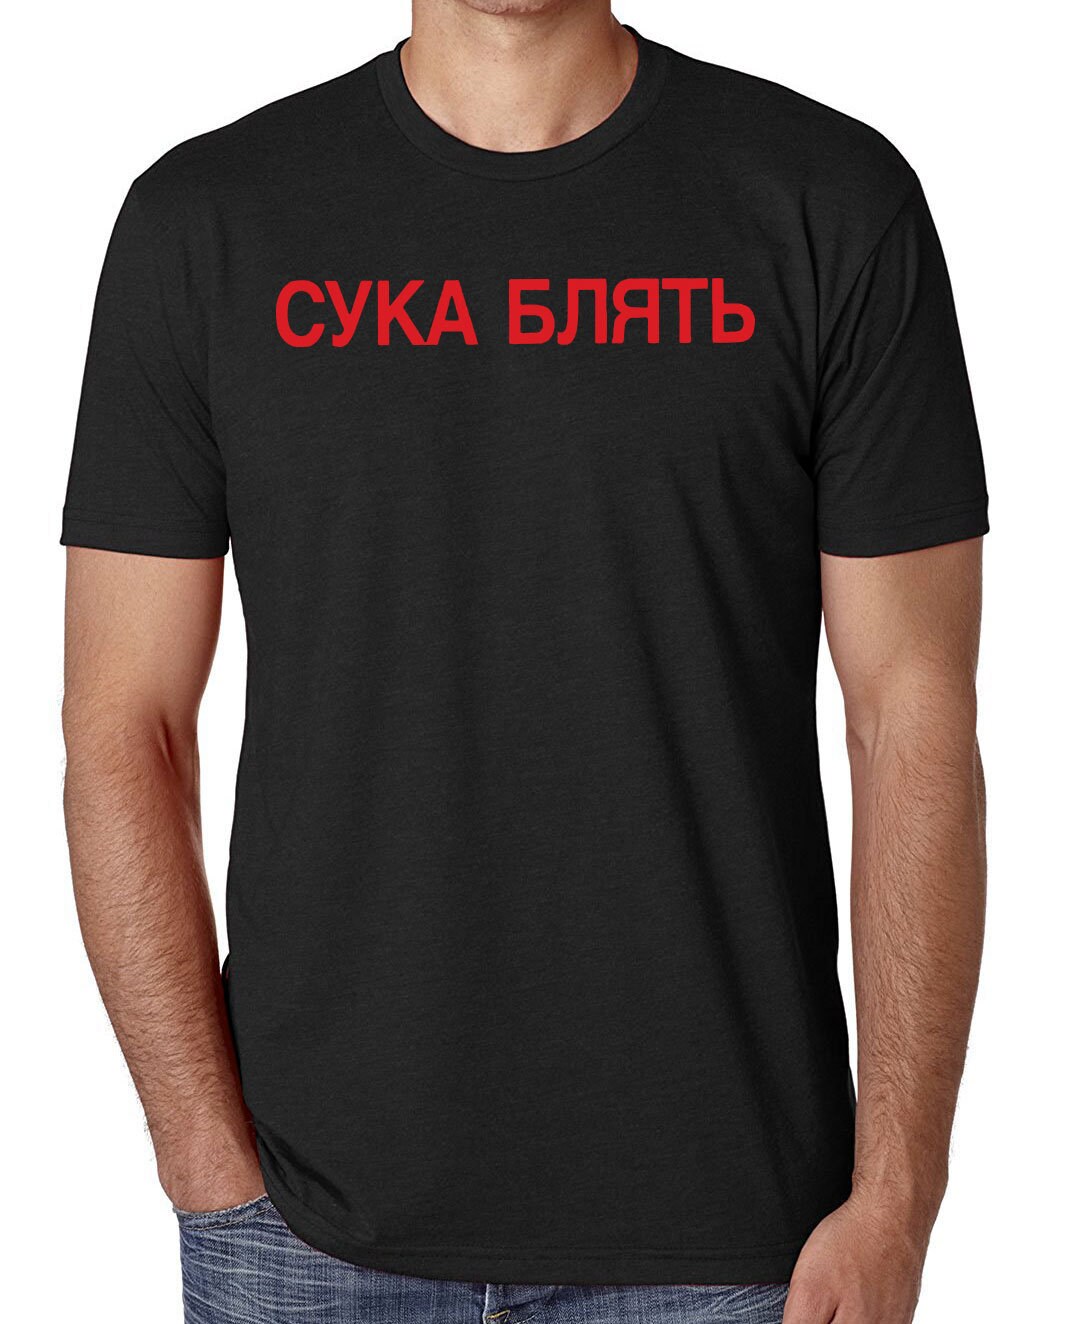 New Pewdiepie Inspired Merch Only Real Cykas T Shirt 2018 Etsy